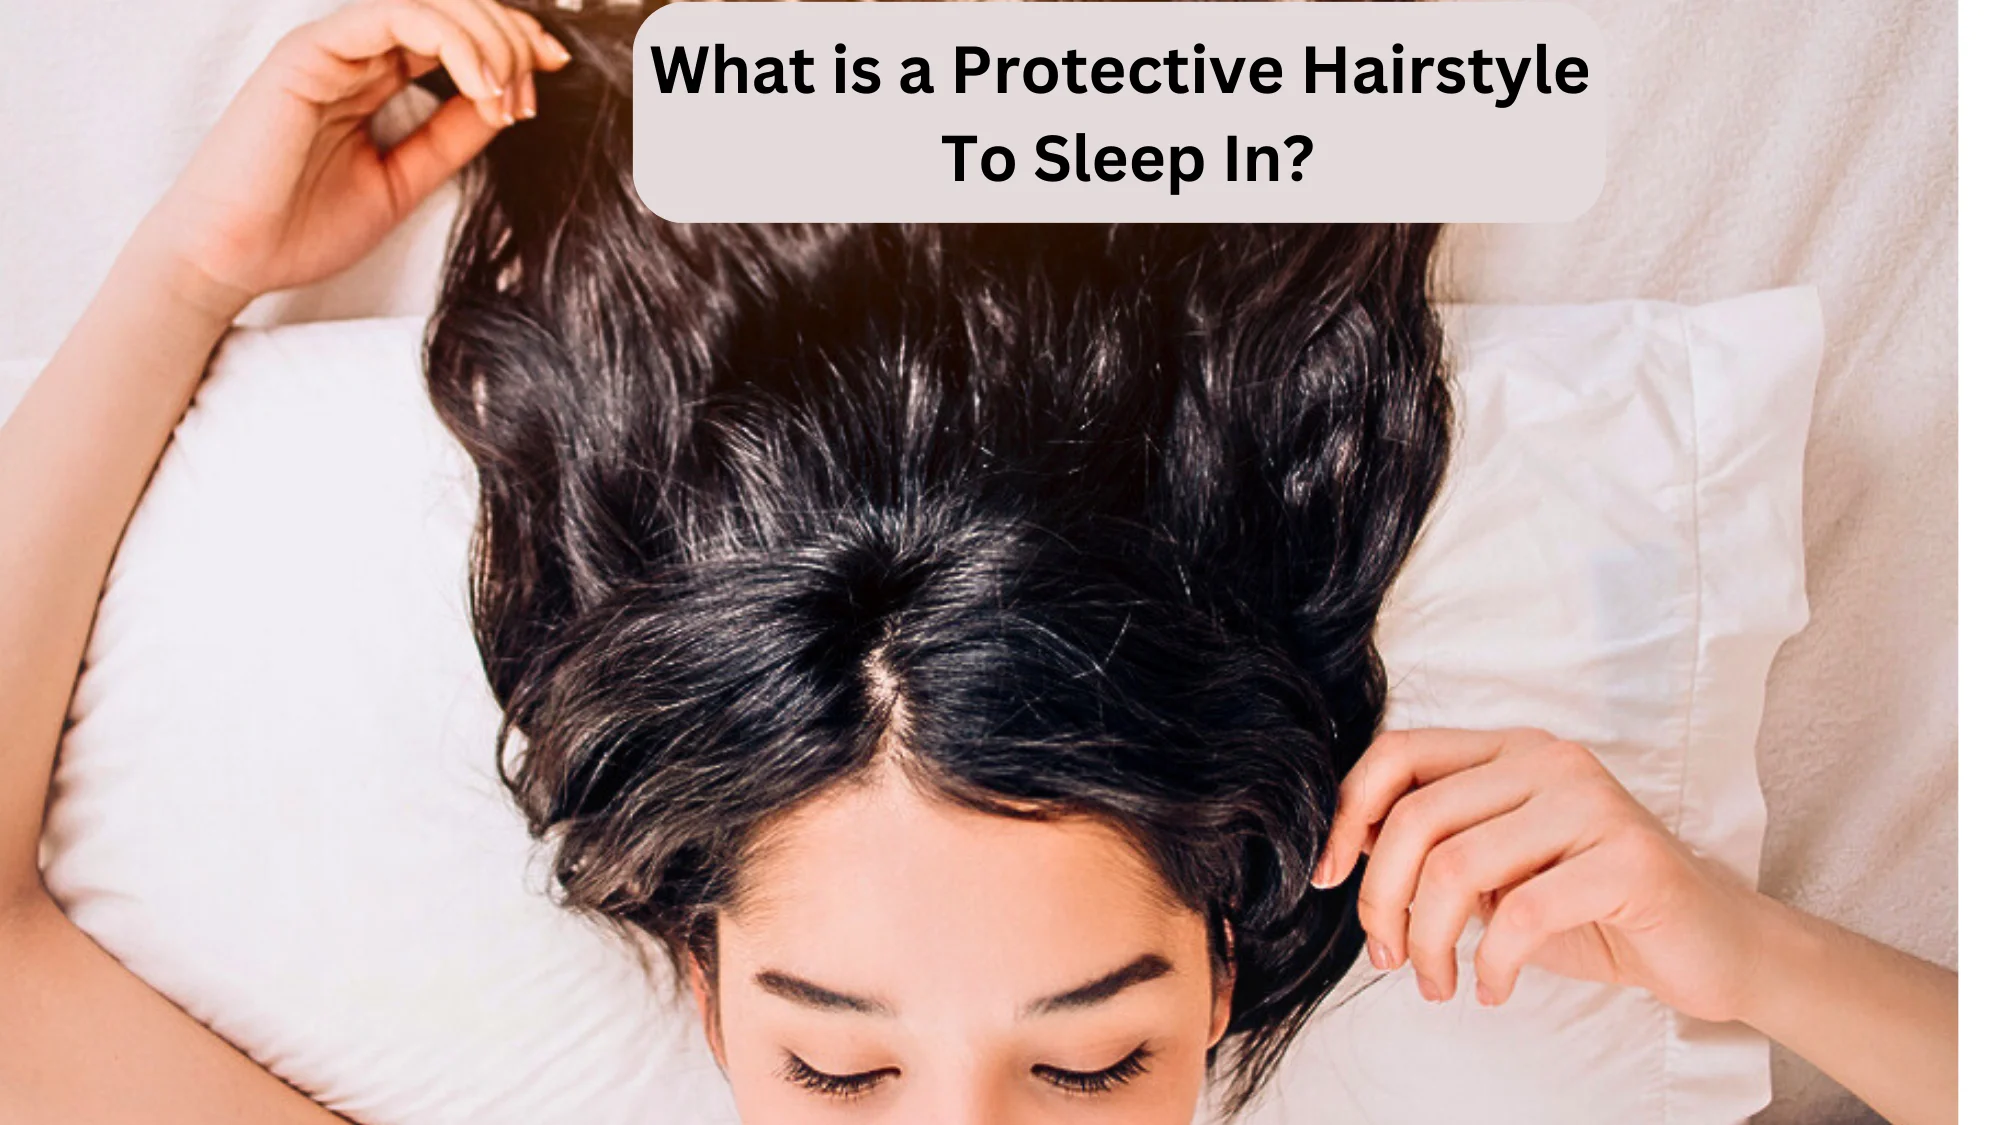 What is a Protective Hairstyle To Sleep In?